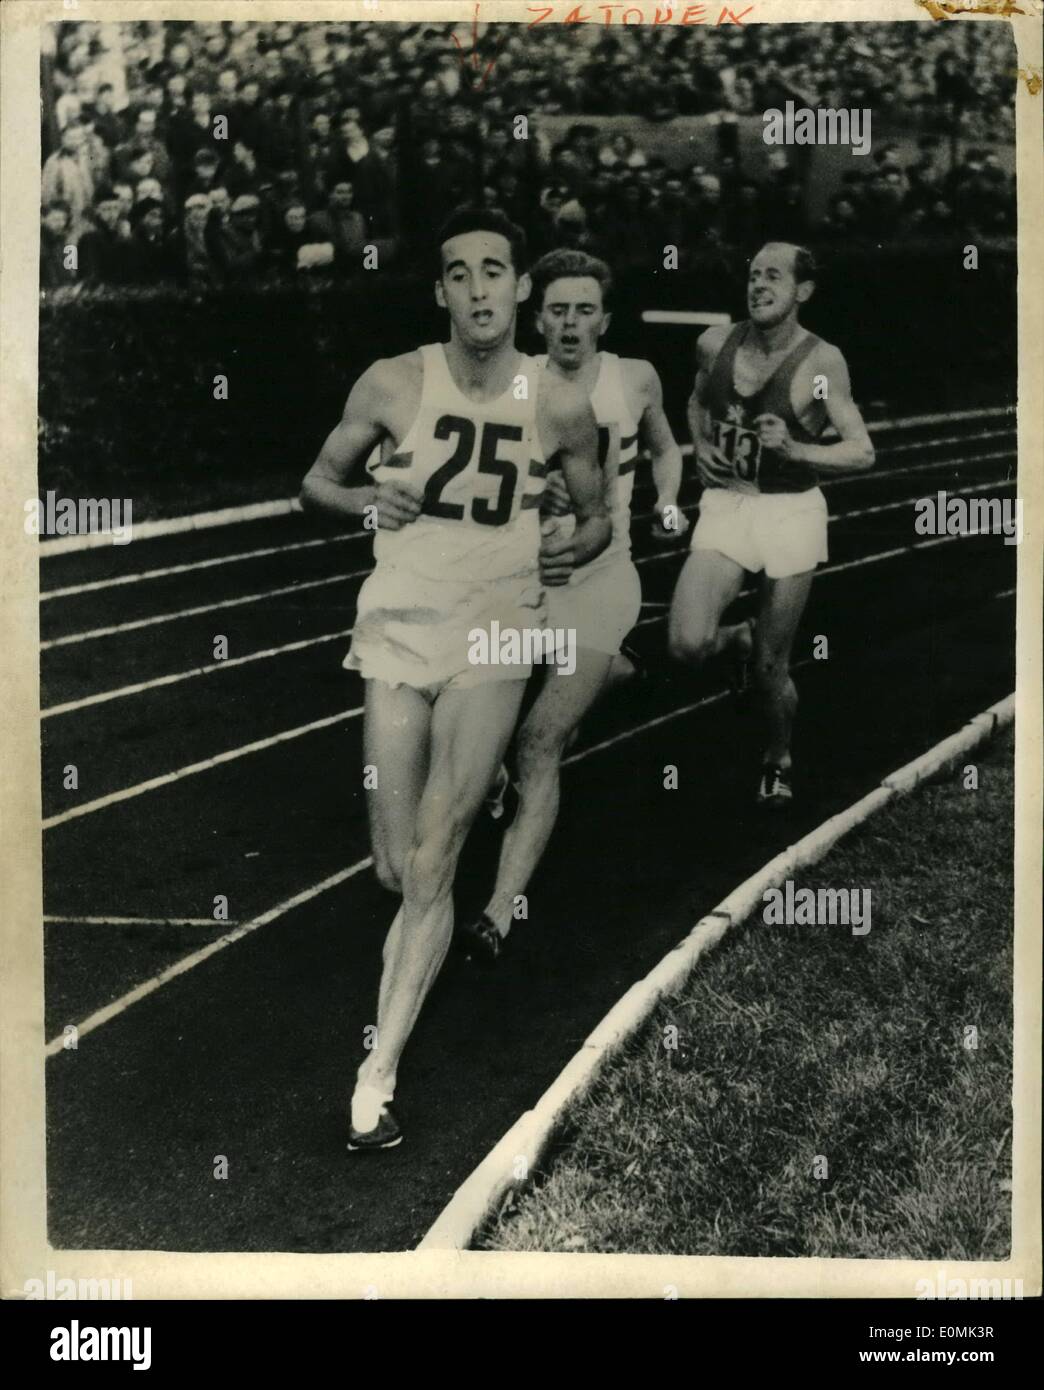 Sep. 17, 1955 - 17 -9-55 Emil Zatopek beats Gordon Pirie by half a lap. Athletic meeting in Prague. Czechoslovakia's Emil Zatopek beat Britain's Gordon Pirie by 200 yards in the 10,000 meters event in the Britain versus Czechoslovakia games in Prague. Keystone Photo Shows: Scene during the great race in Prague, showing Gordon Pirie, Sando and Emil Zatopek. The latter won by 200 yards. Stock Photo